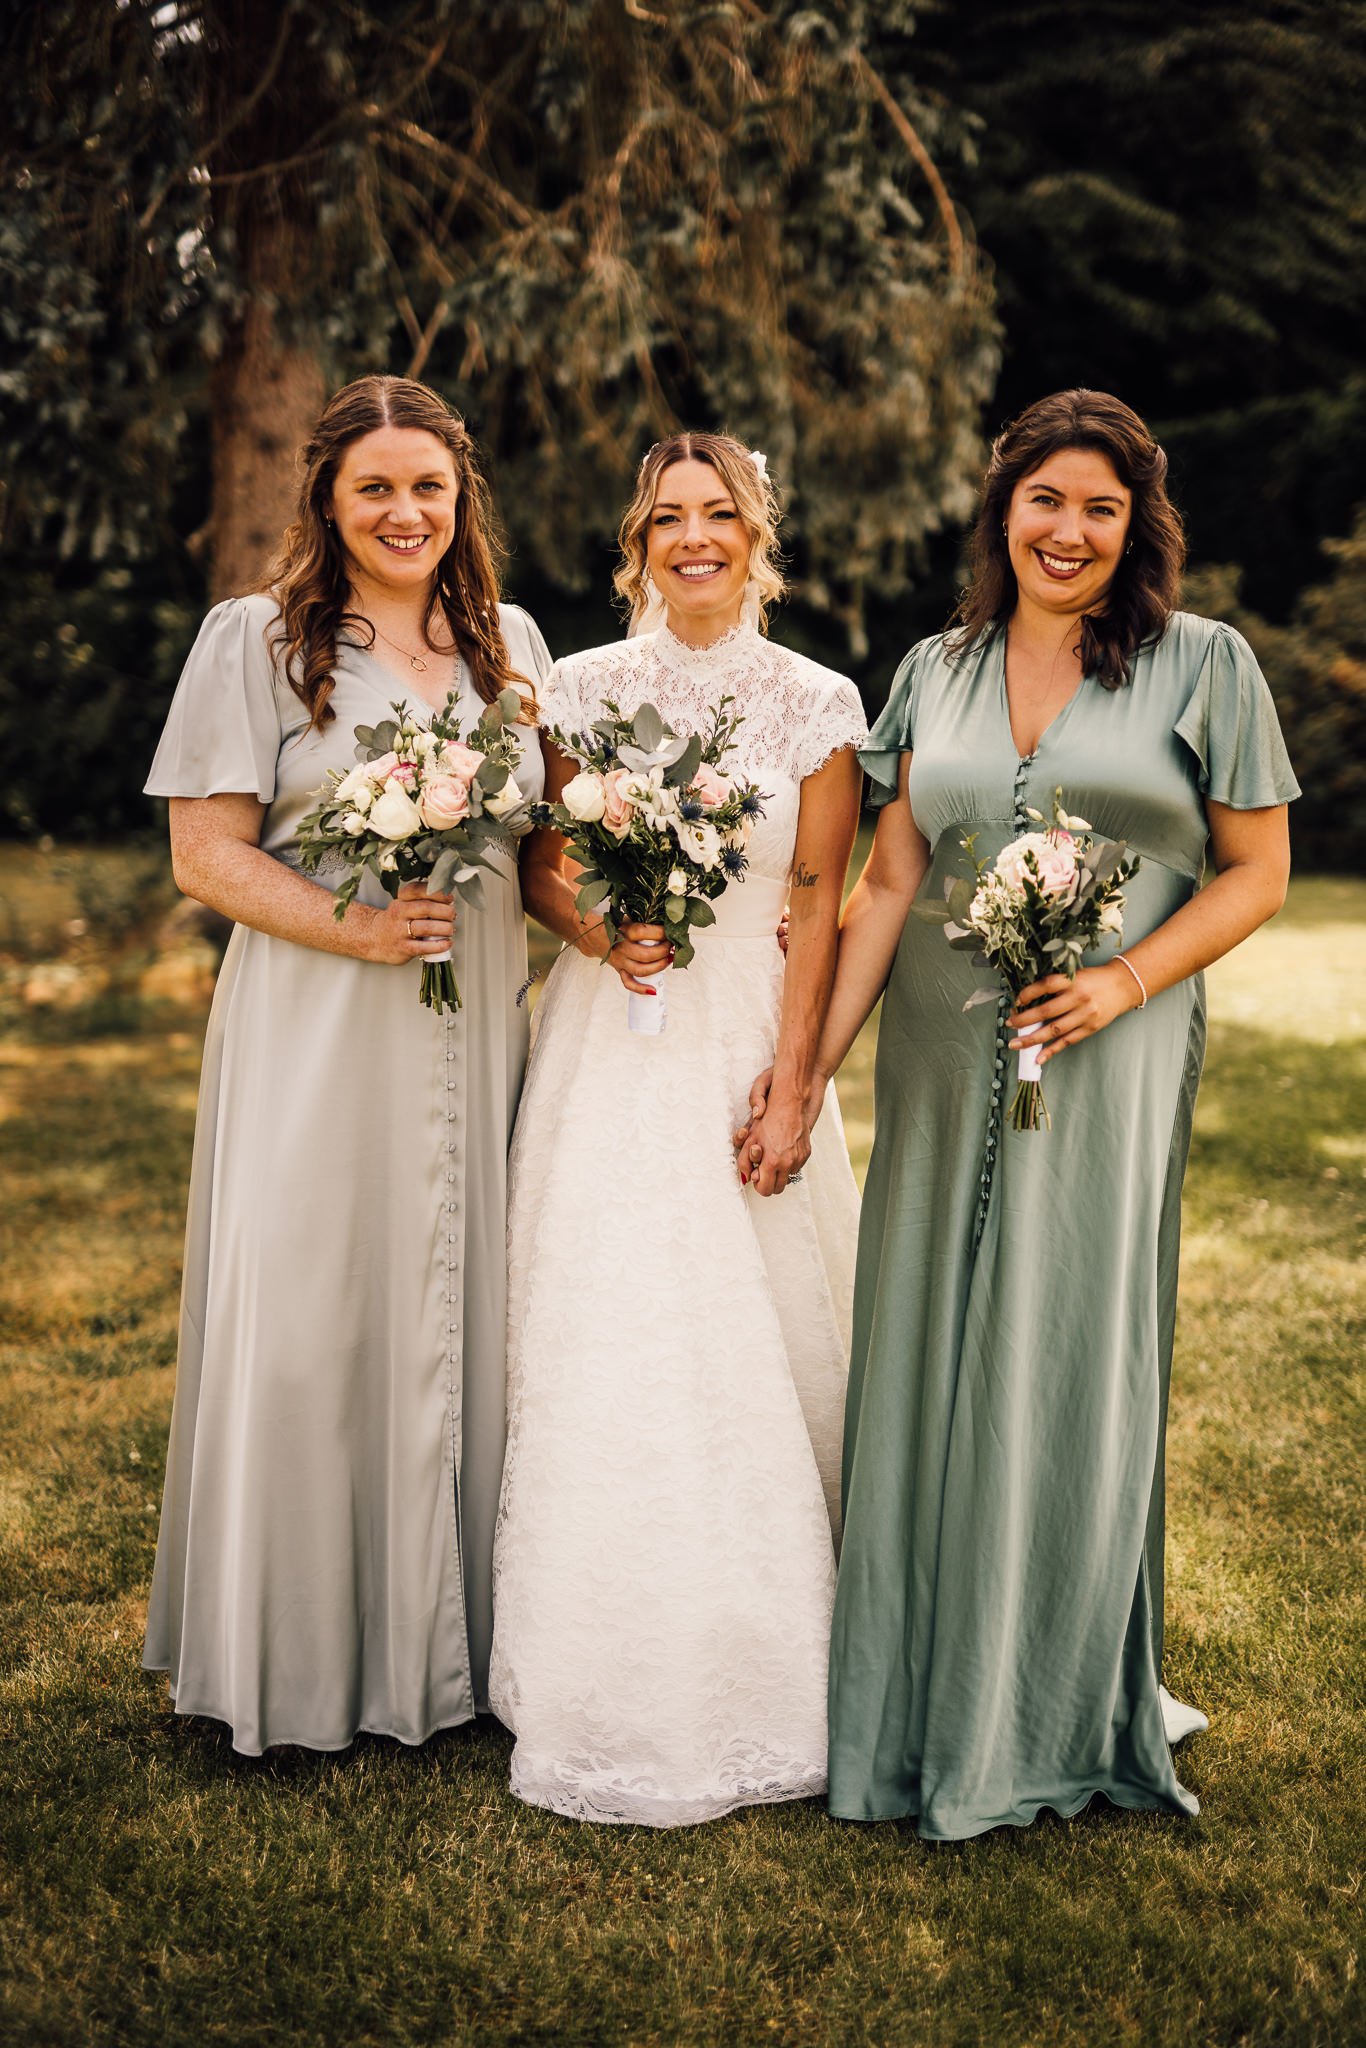  the Bride and her bridesmaids pose for a photo together 